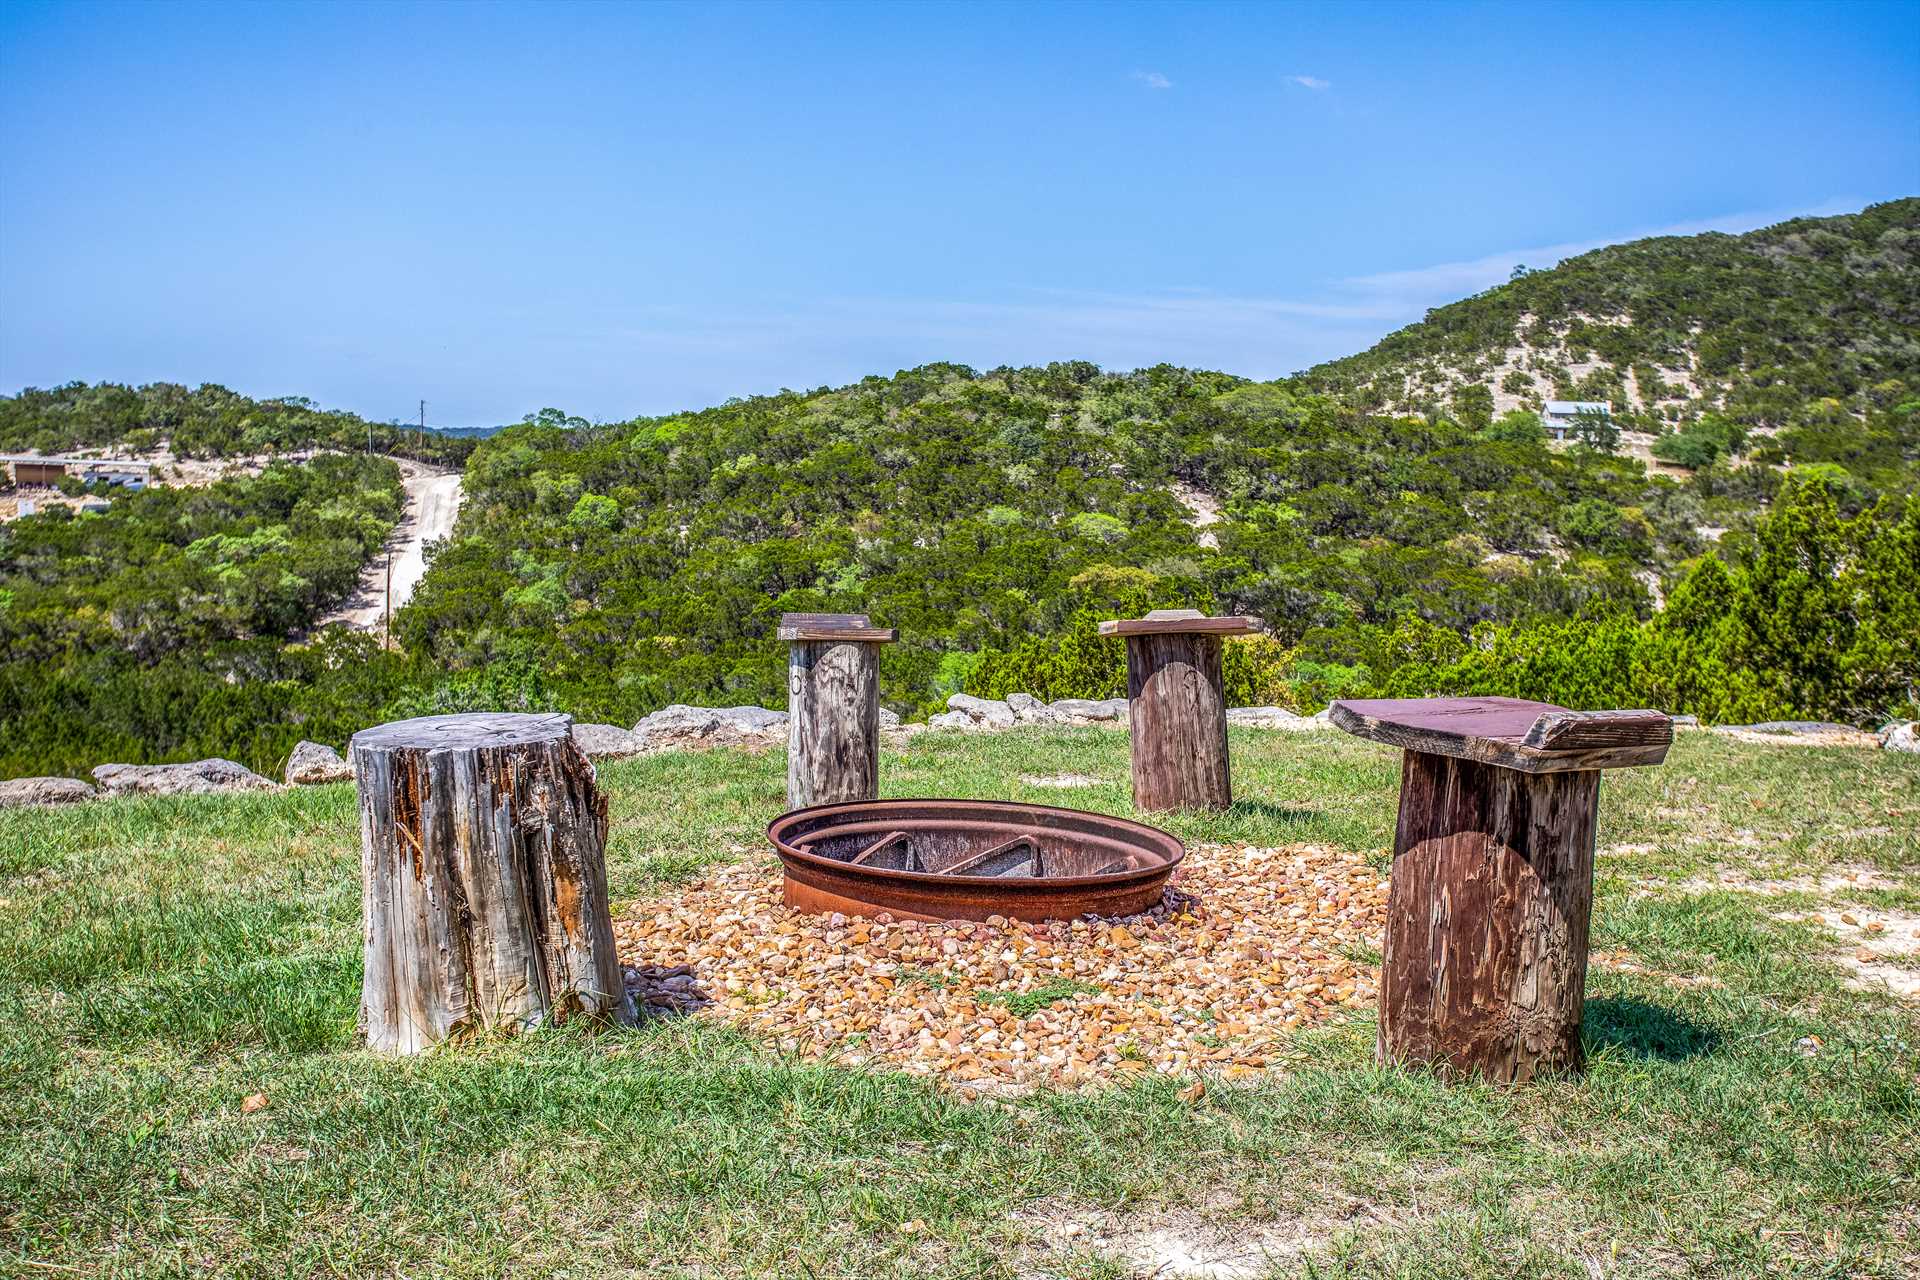                                                 Grab some firewood in nearby Bandera or Pipe Creek, and enjoy a quiet and scenic Hill Country evening around the fire pit!